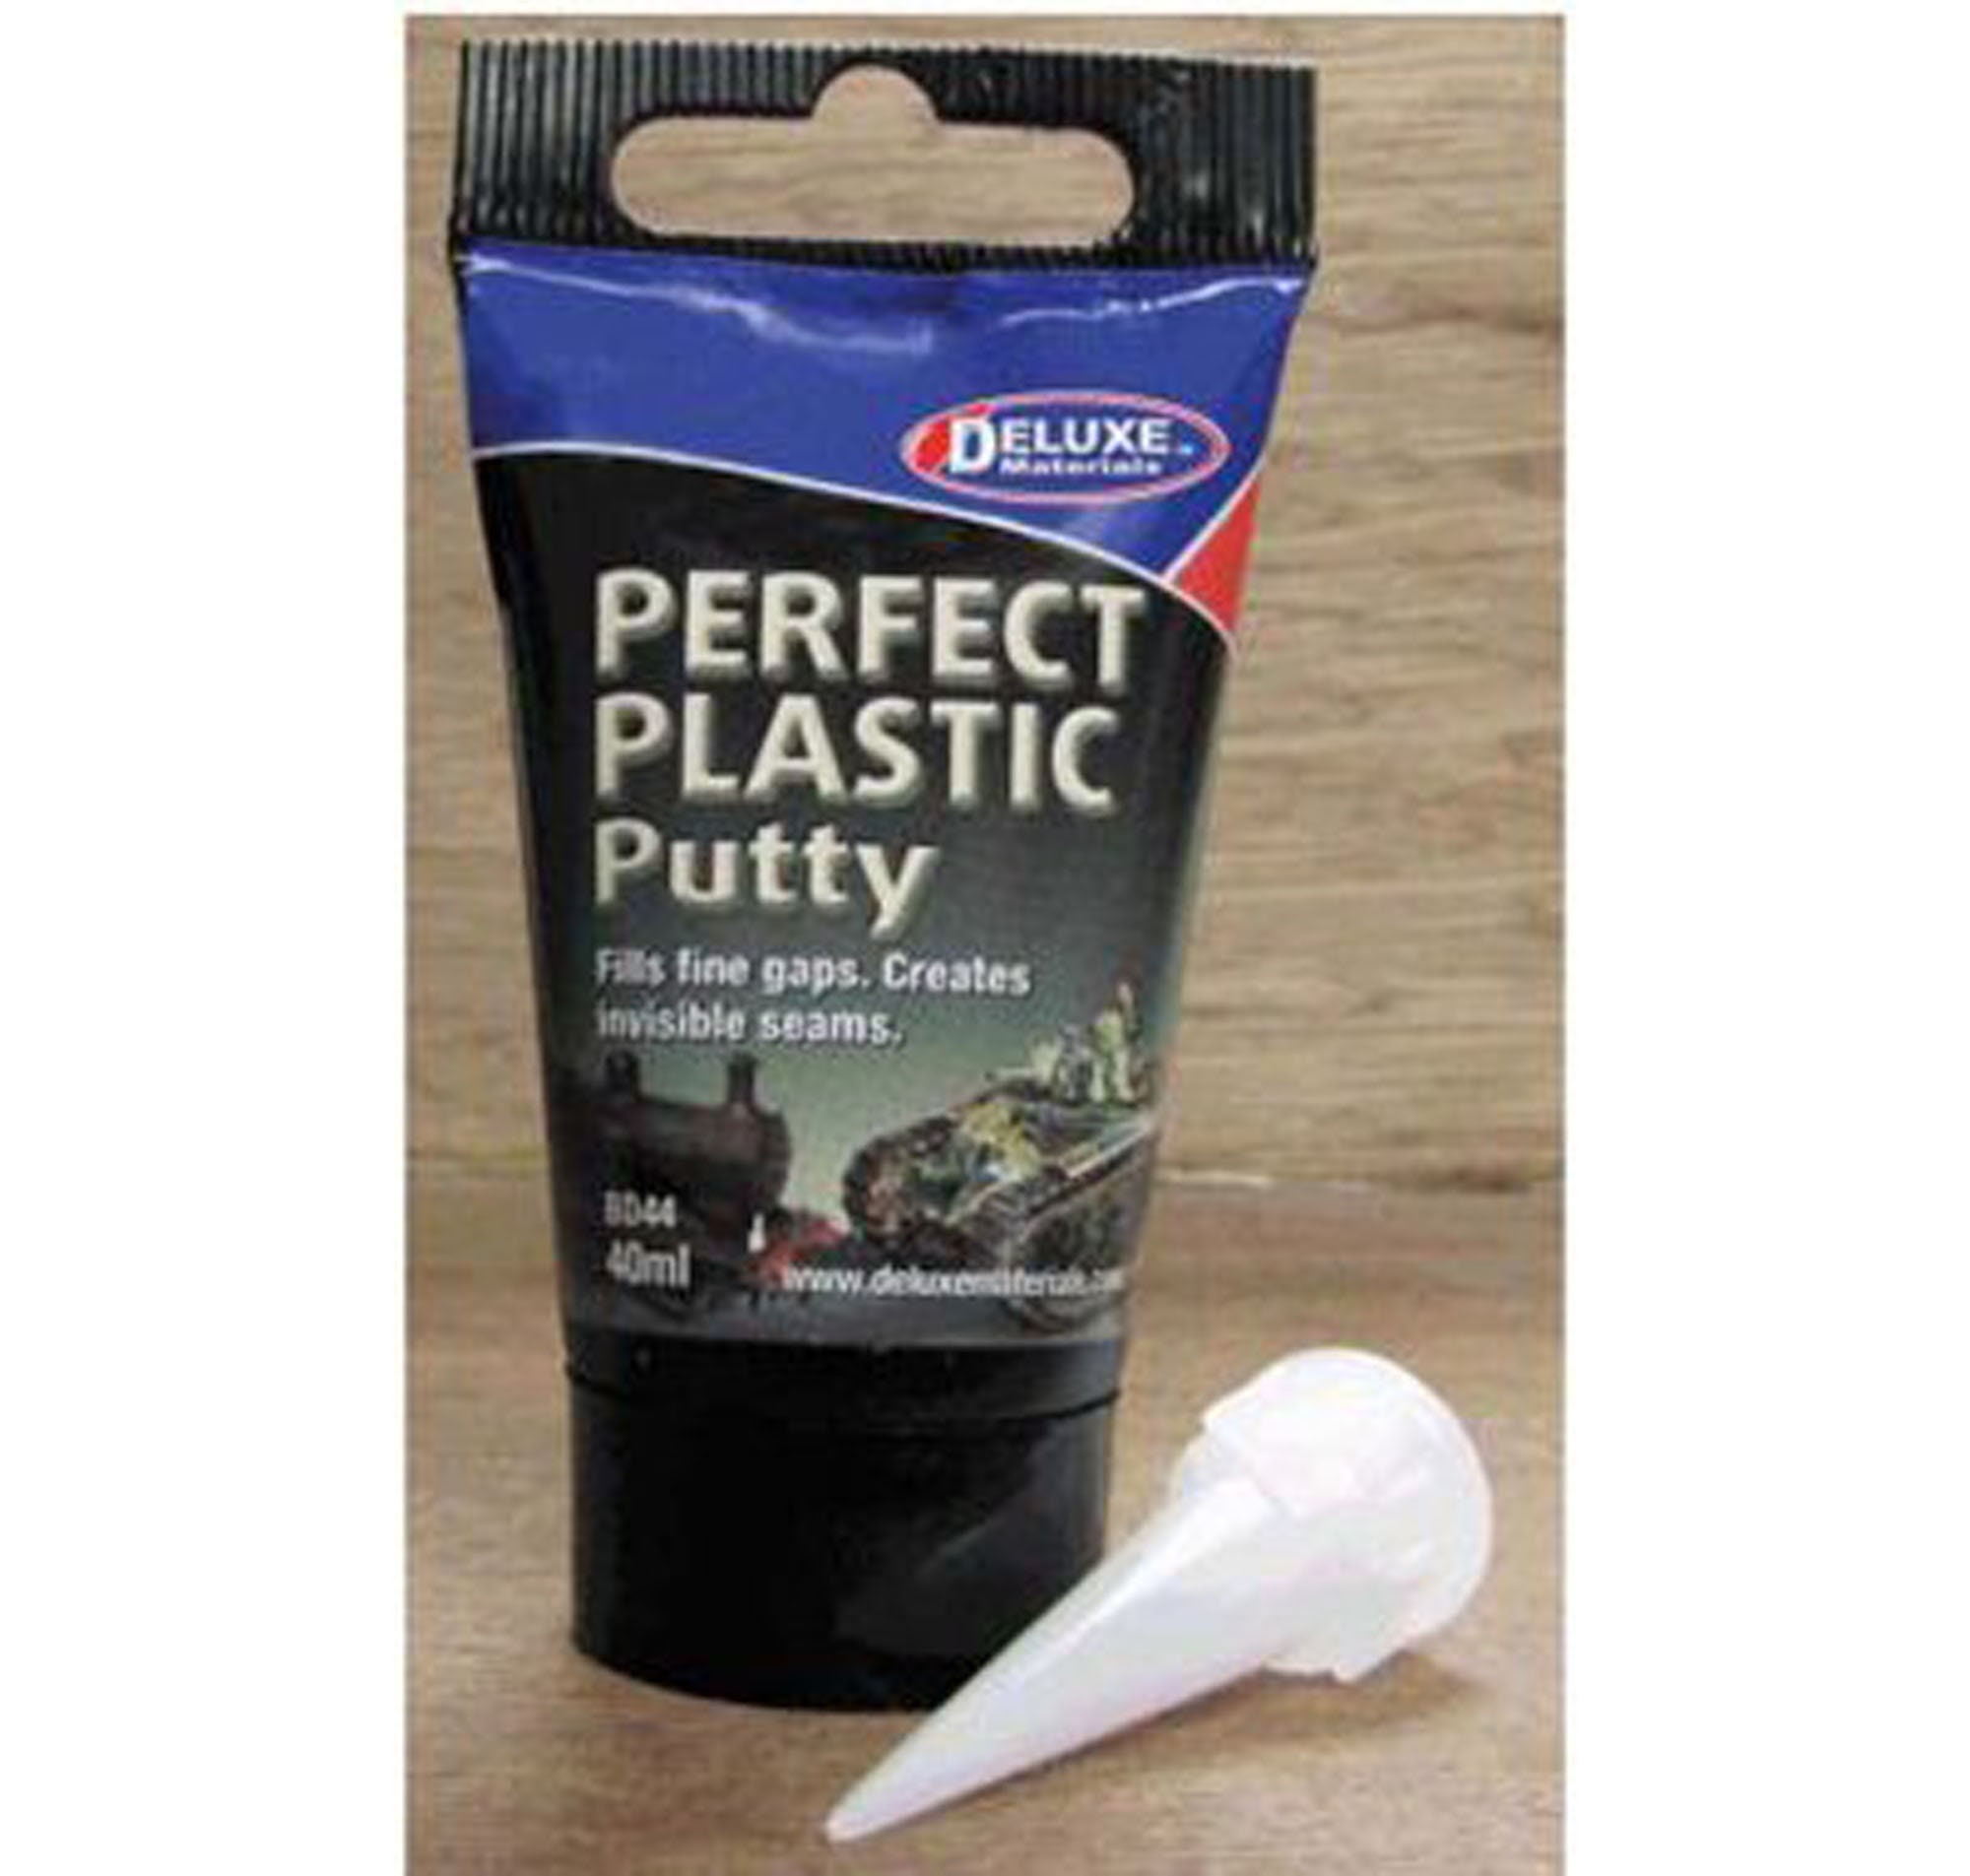 Perfect Plastic Putty for Filling and Fabricating - Dollhouse Miniature